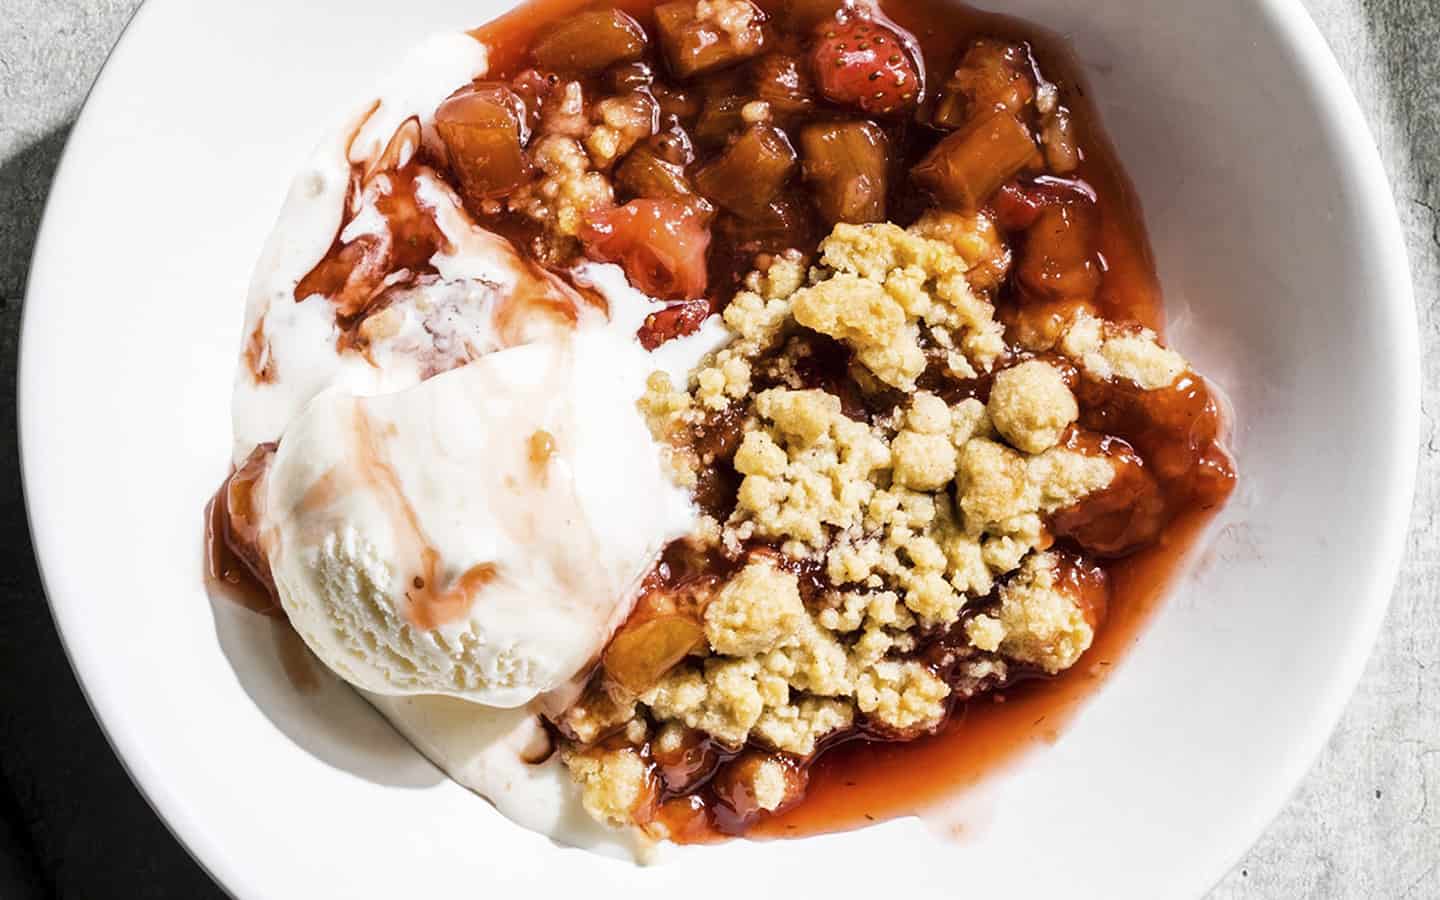 A simple, crispy-topped strawberry-rhubarb crisp that you can make any time of year